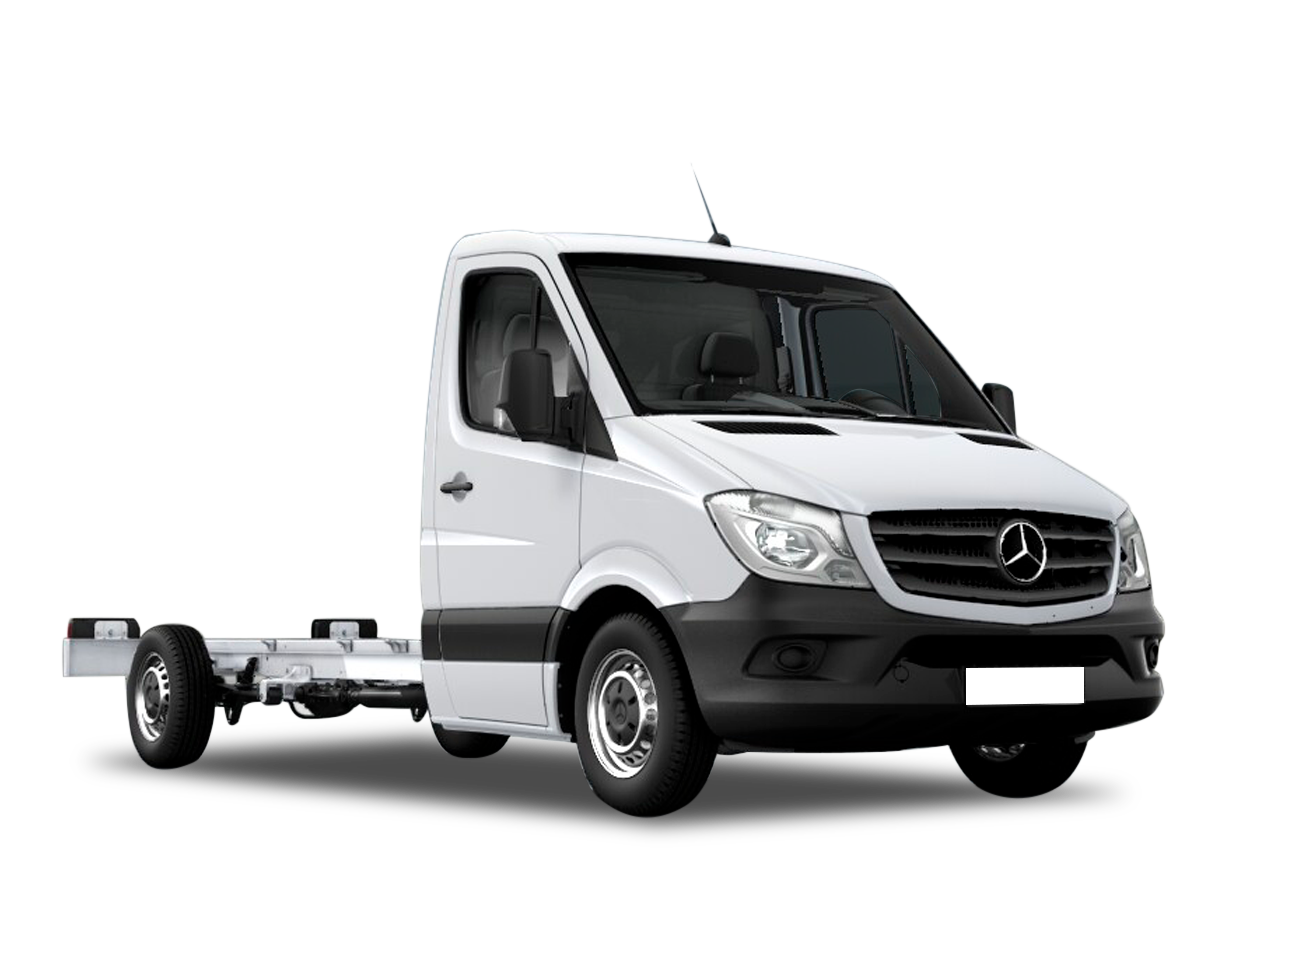 MERCEDES-BENZ - SPRINTER - 2.2 CDI DIESEL CHASSIS 313 STREET EXTRA LONGO MANUAL